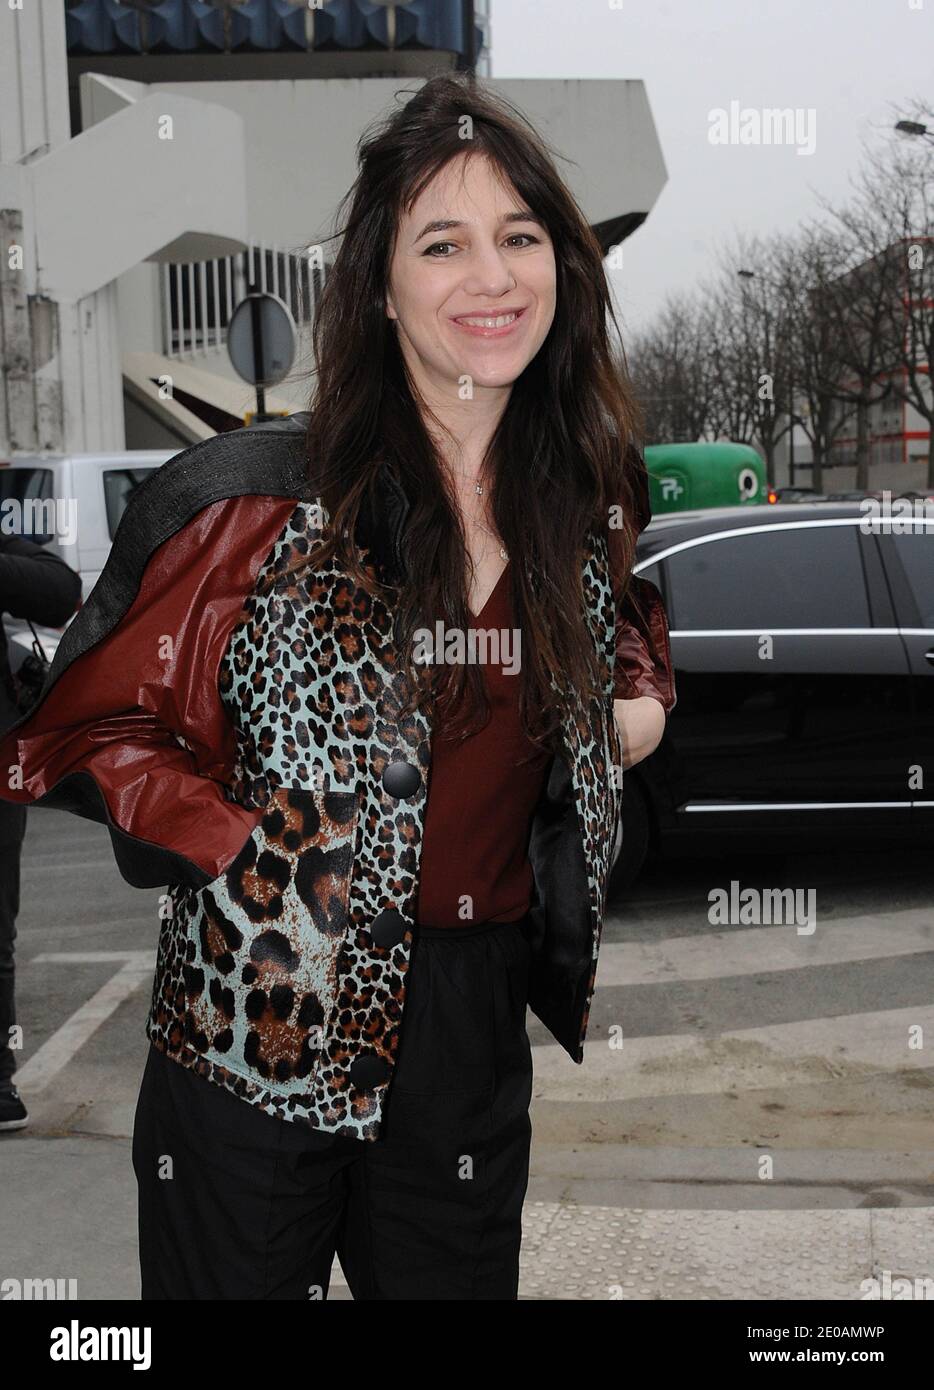 Charlotte Gainsbourg arriving for the Balenciaga Fall-Winter 2012-2013  Ready-To-Wear collection show held at Quai Javel in Paris, France on March  1, 2012, as part of the Paris Fashion Week. Photo by Giancarlo